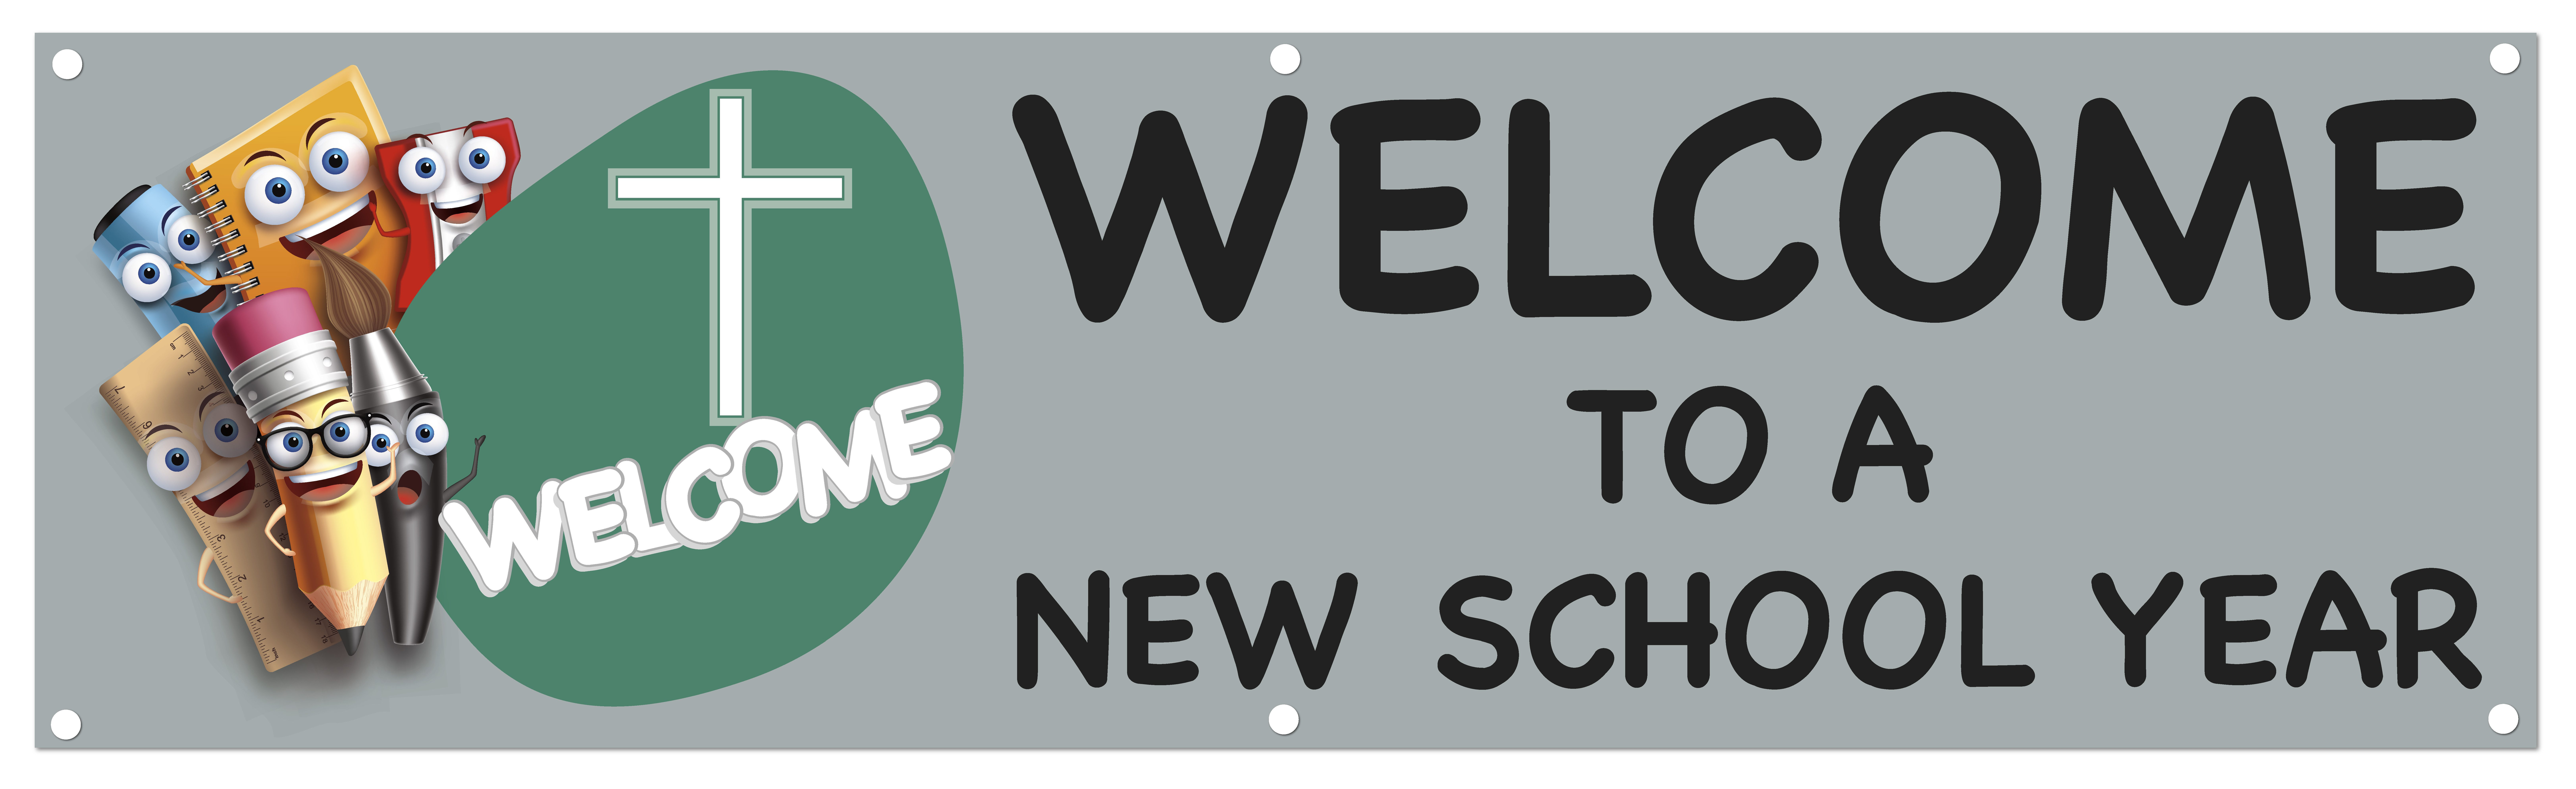 Welcome to a New School Year banner